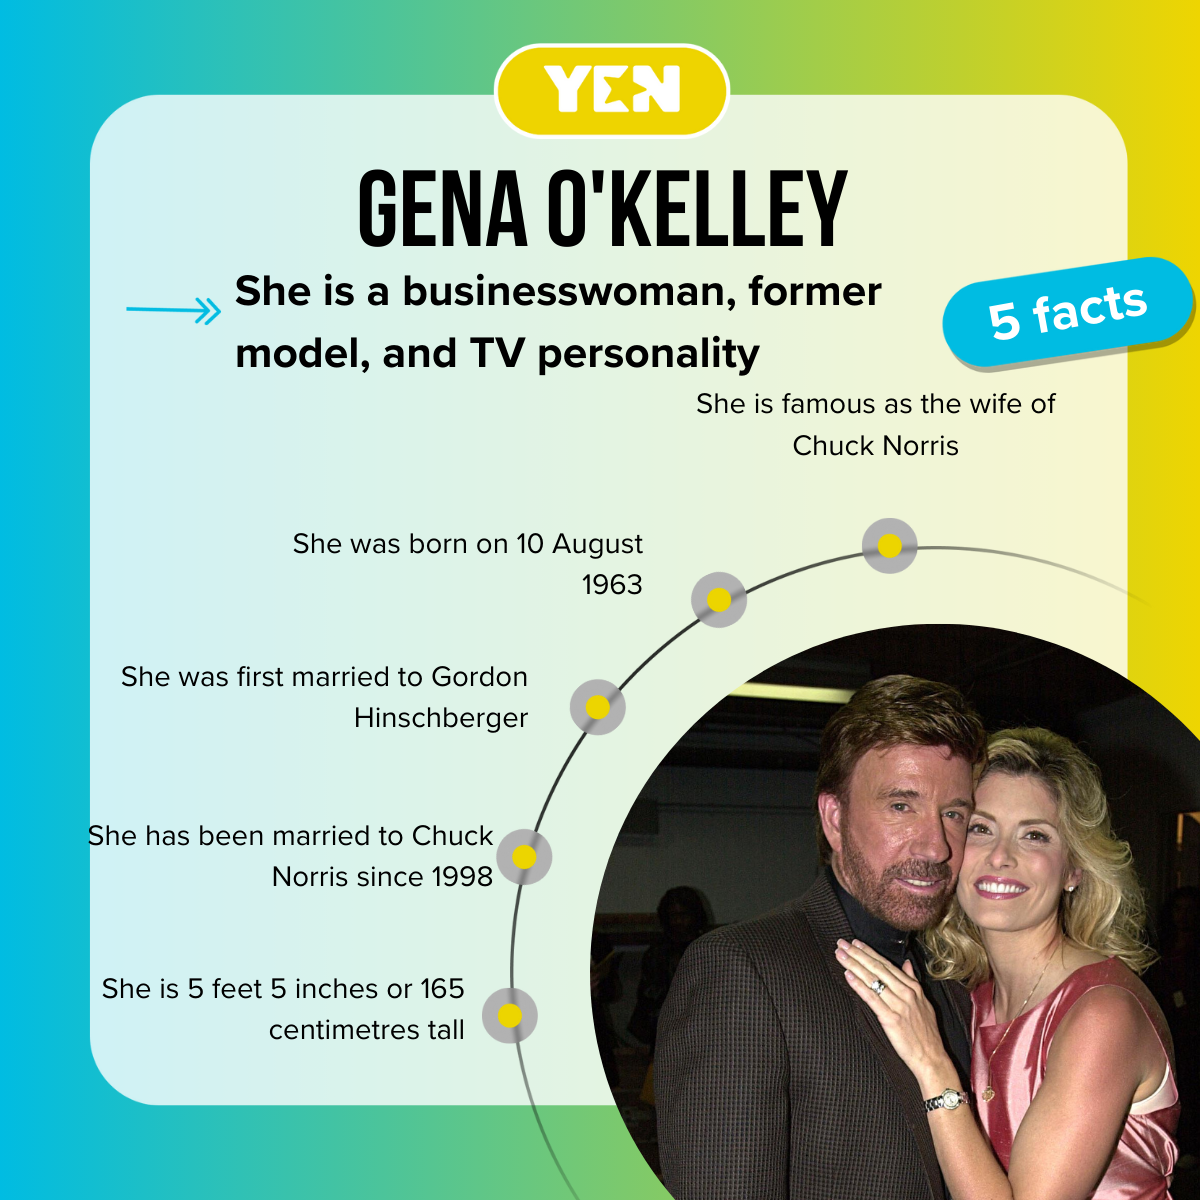 Facts about Gena O'Kelley